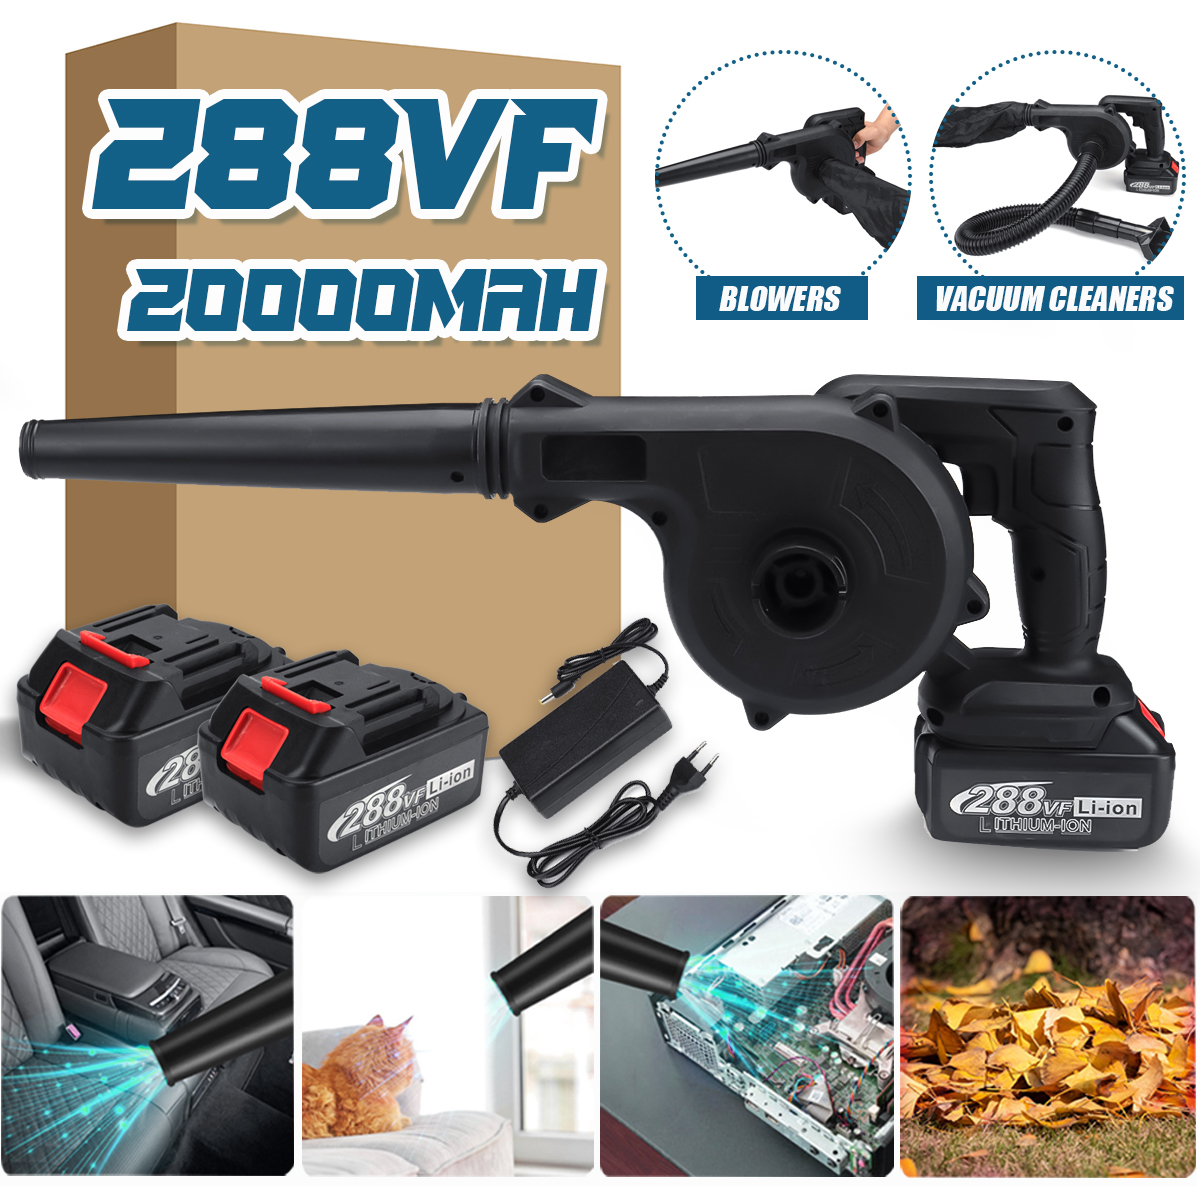 2-IN-1-18V-Cordless-Electric-Air-Blower--Suction-Handheld-Leaf-Computer-Dust-Collector-Cleaner-W-Non-1855962-3